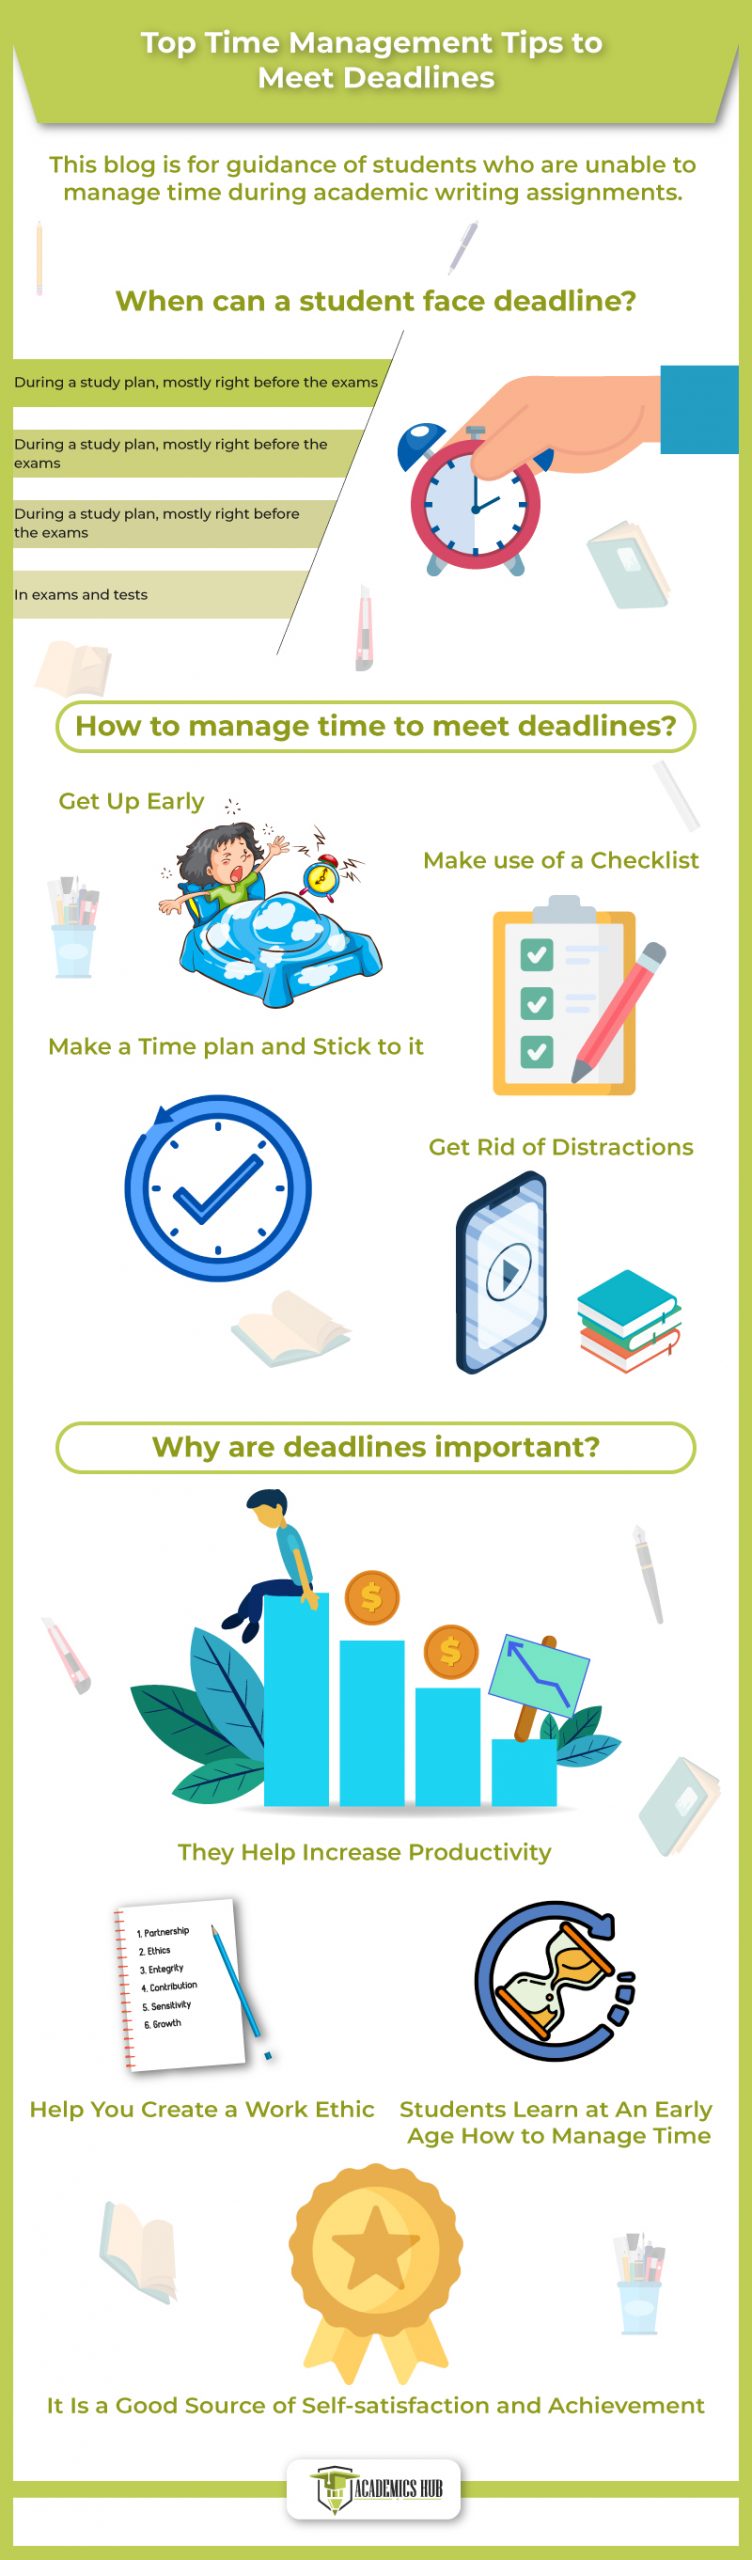 Top-Time-Management-Tips-to-Meet-Academic-Writing-Deadlines-Info-graphic-Academics-Hub-scaled